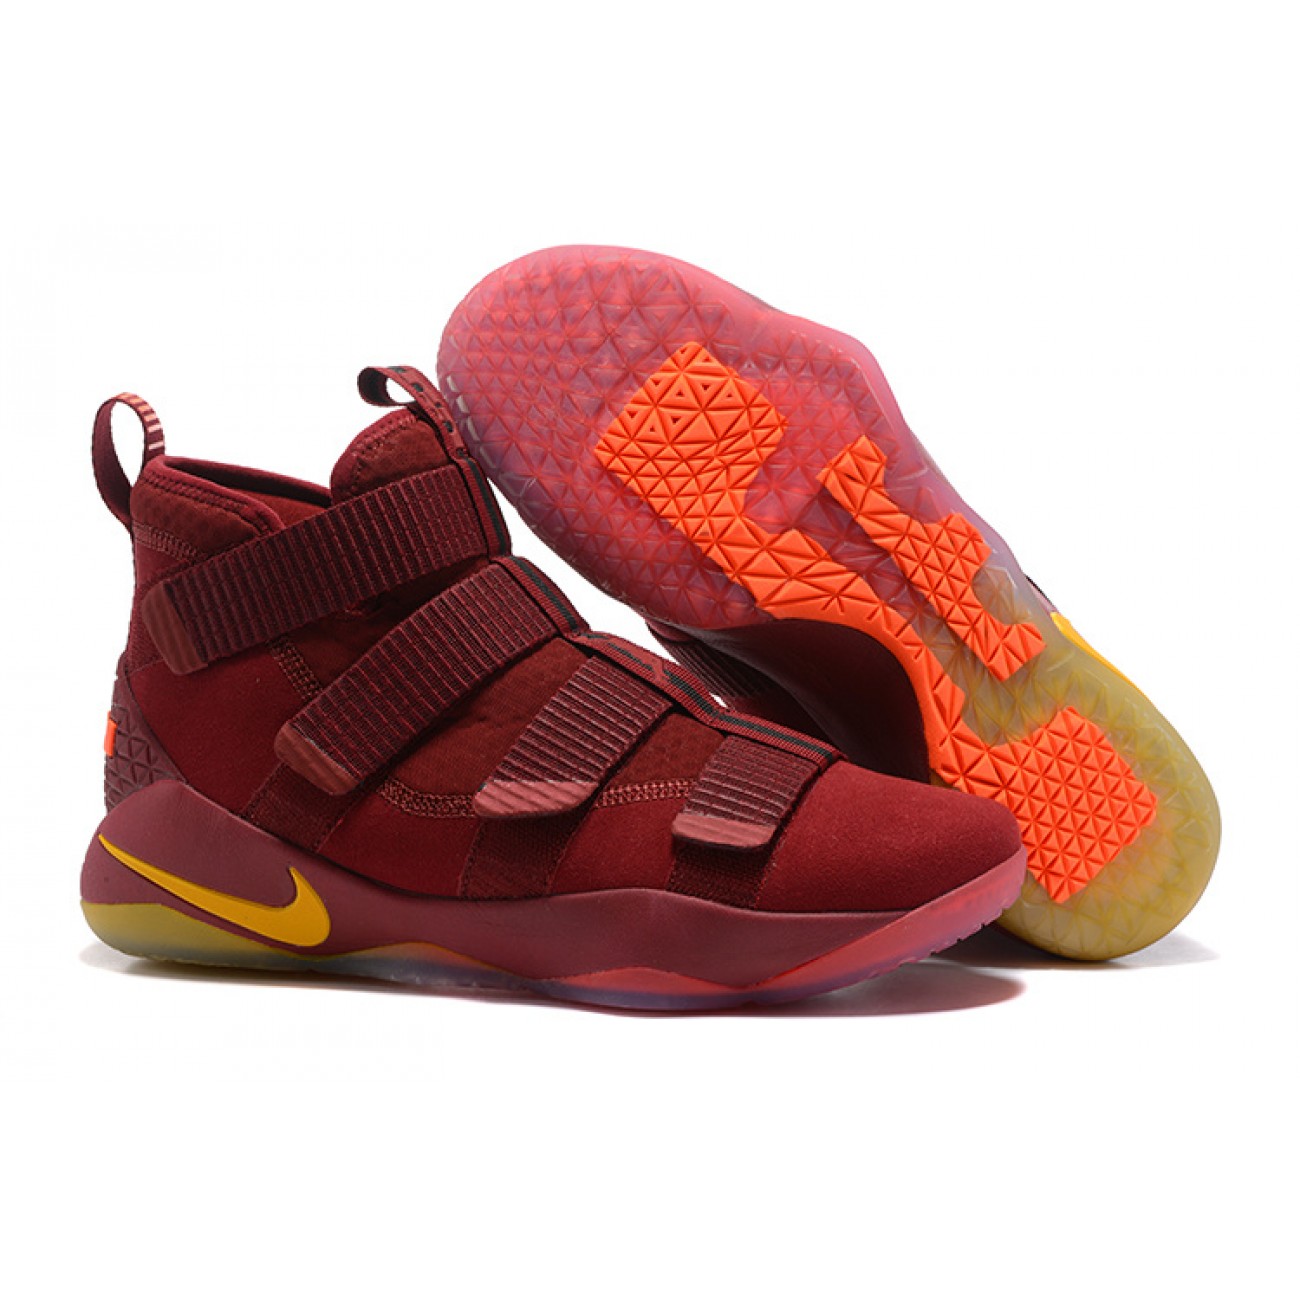 Lebron Soldier 11 "The Cavaliers"